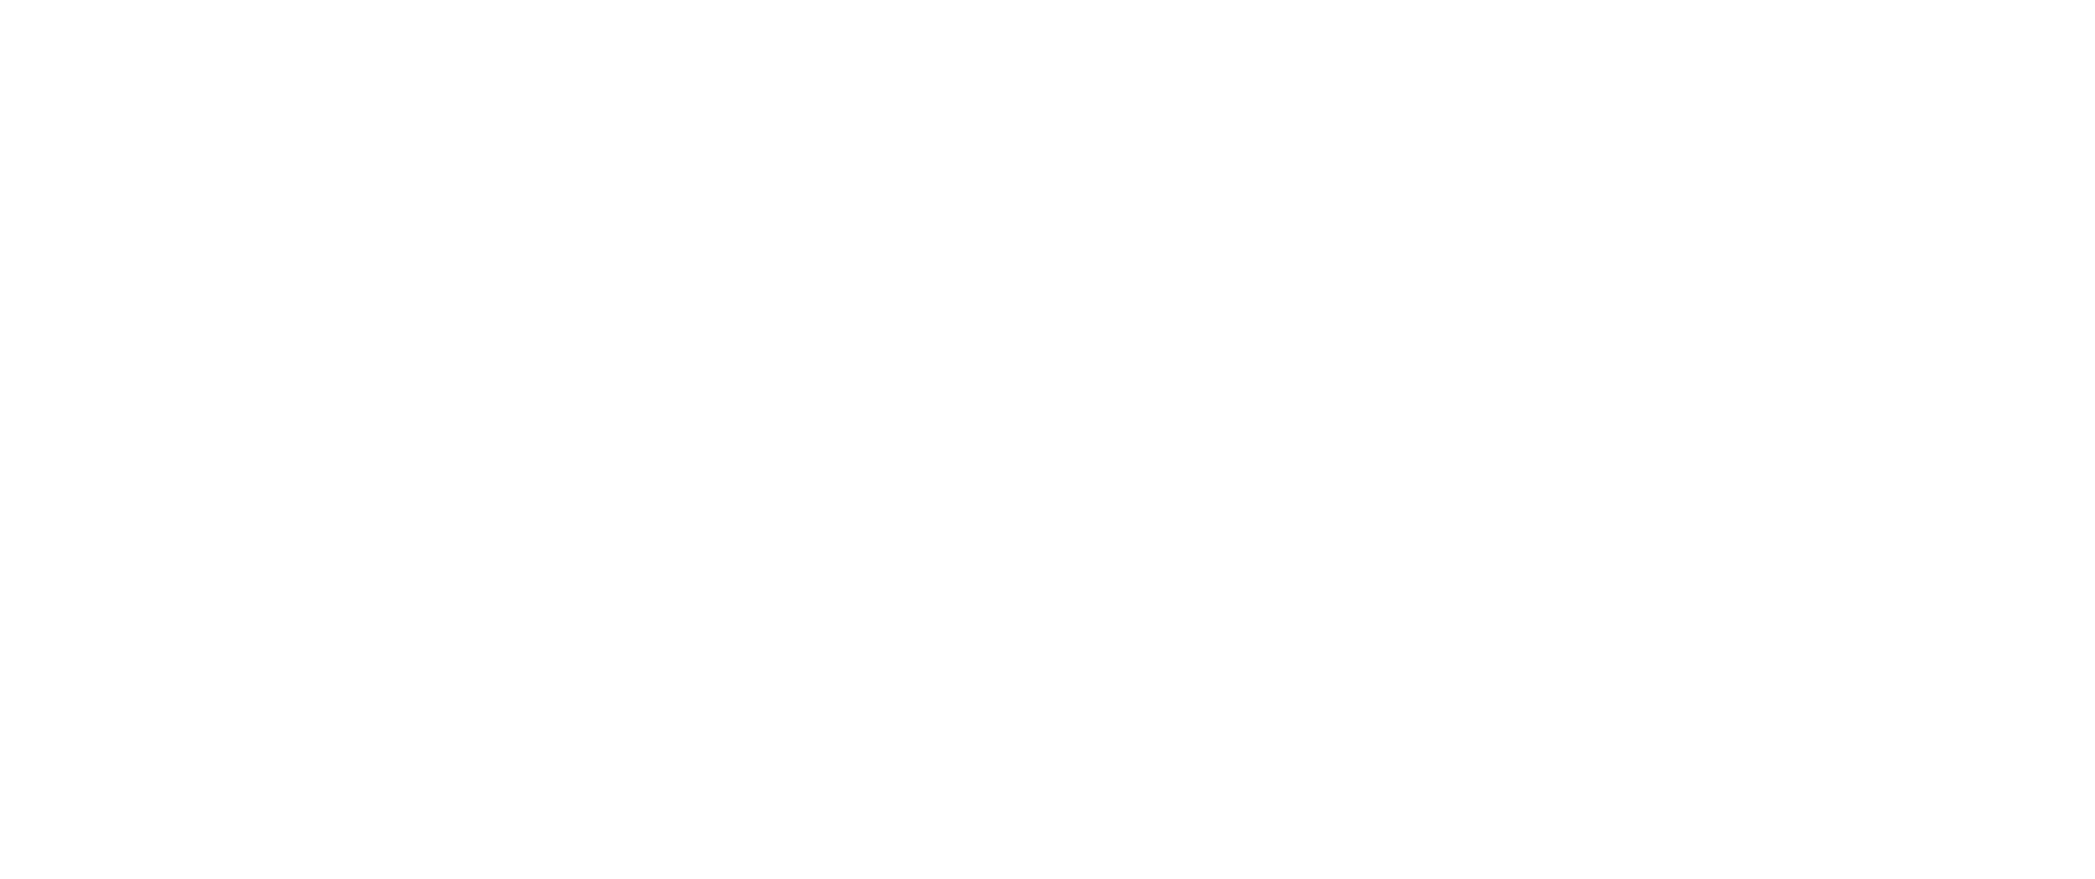 Wertz Law Firm, P.C. Experienced. Knowledgeable. Dedicated.